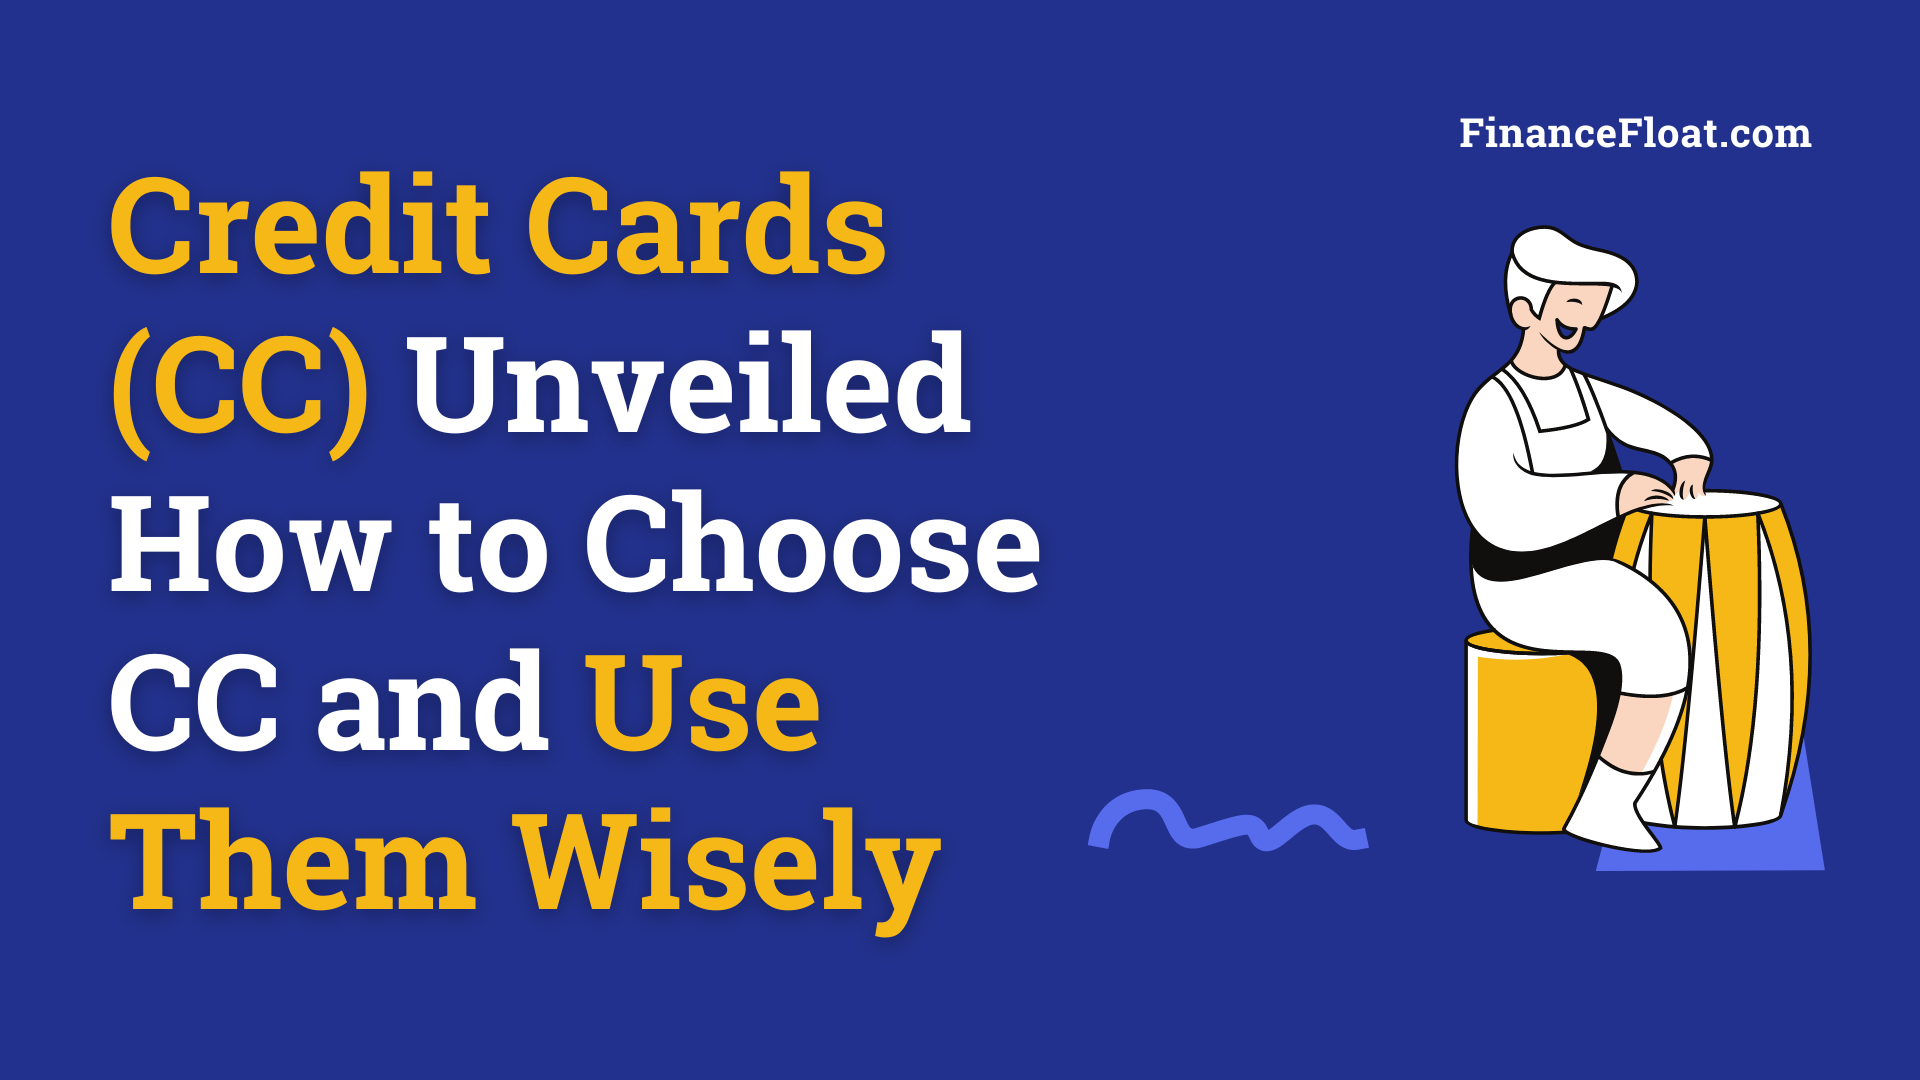 Credit Cards (CC) Unveiled How to Choose CC and Use Them Wisely